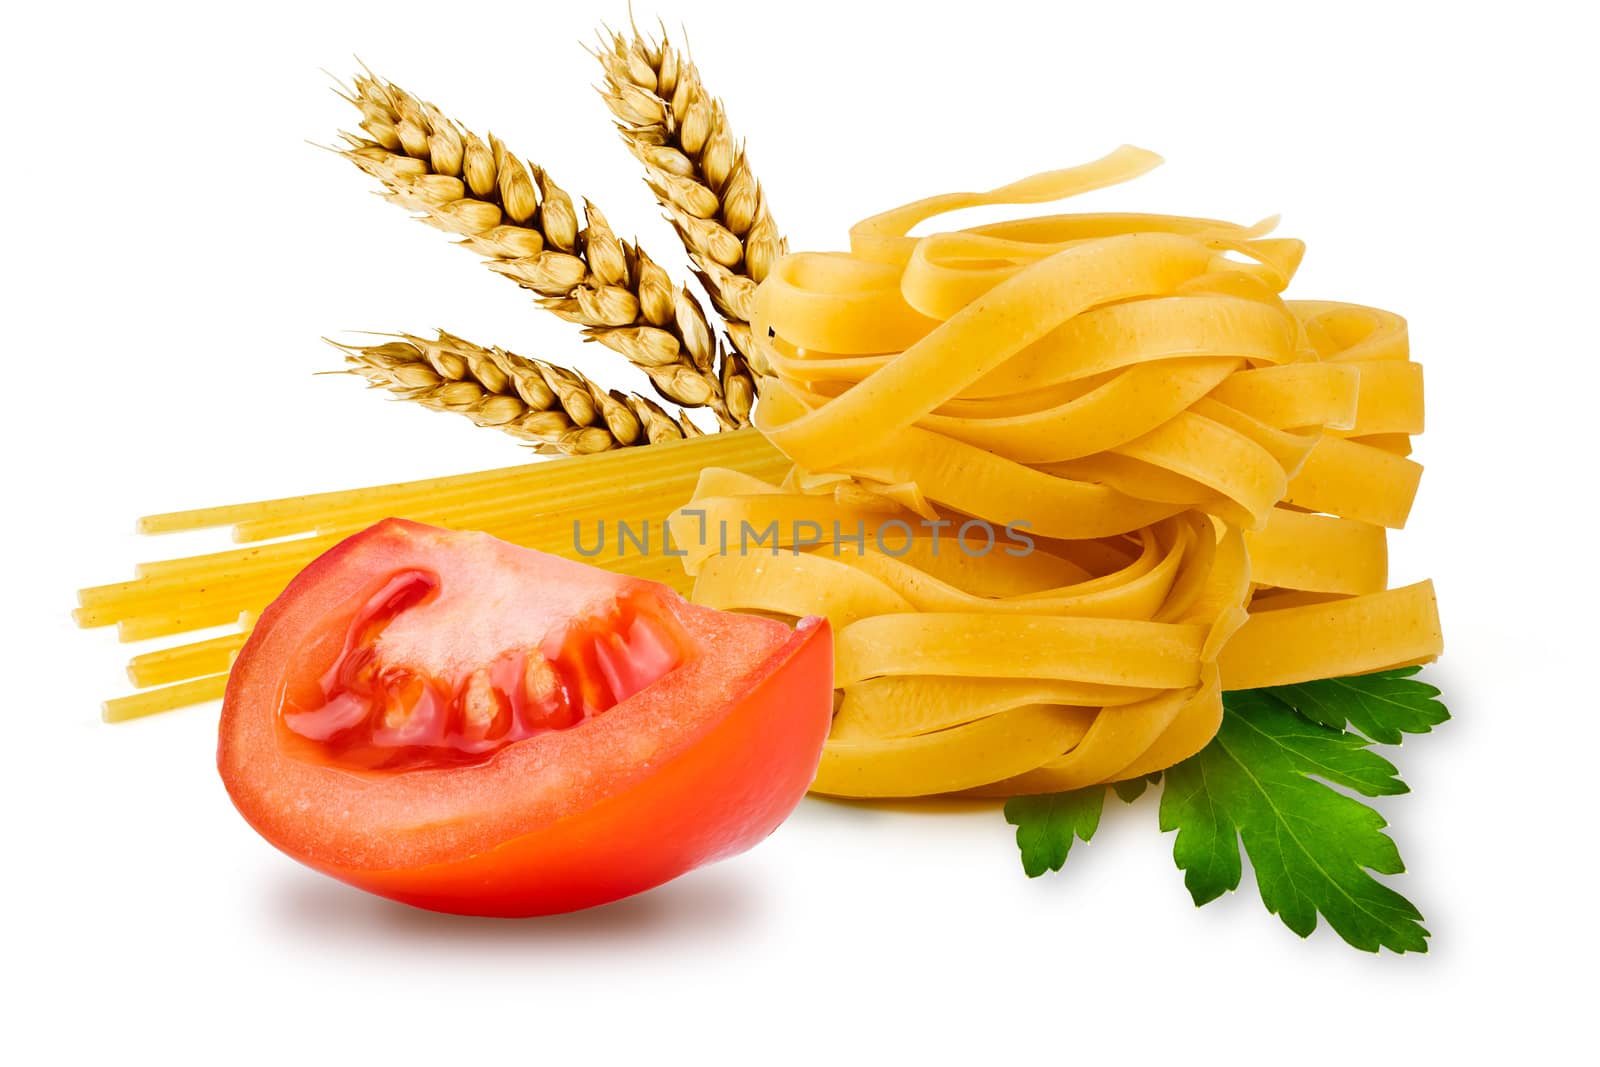 egg noodles, pasta, tomato, slice tomatoes, ears of wheat, and fresh parsley leaf on a white background